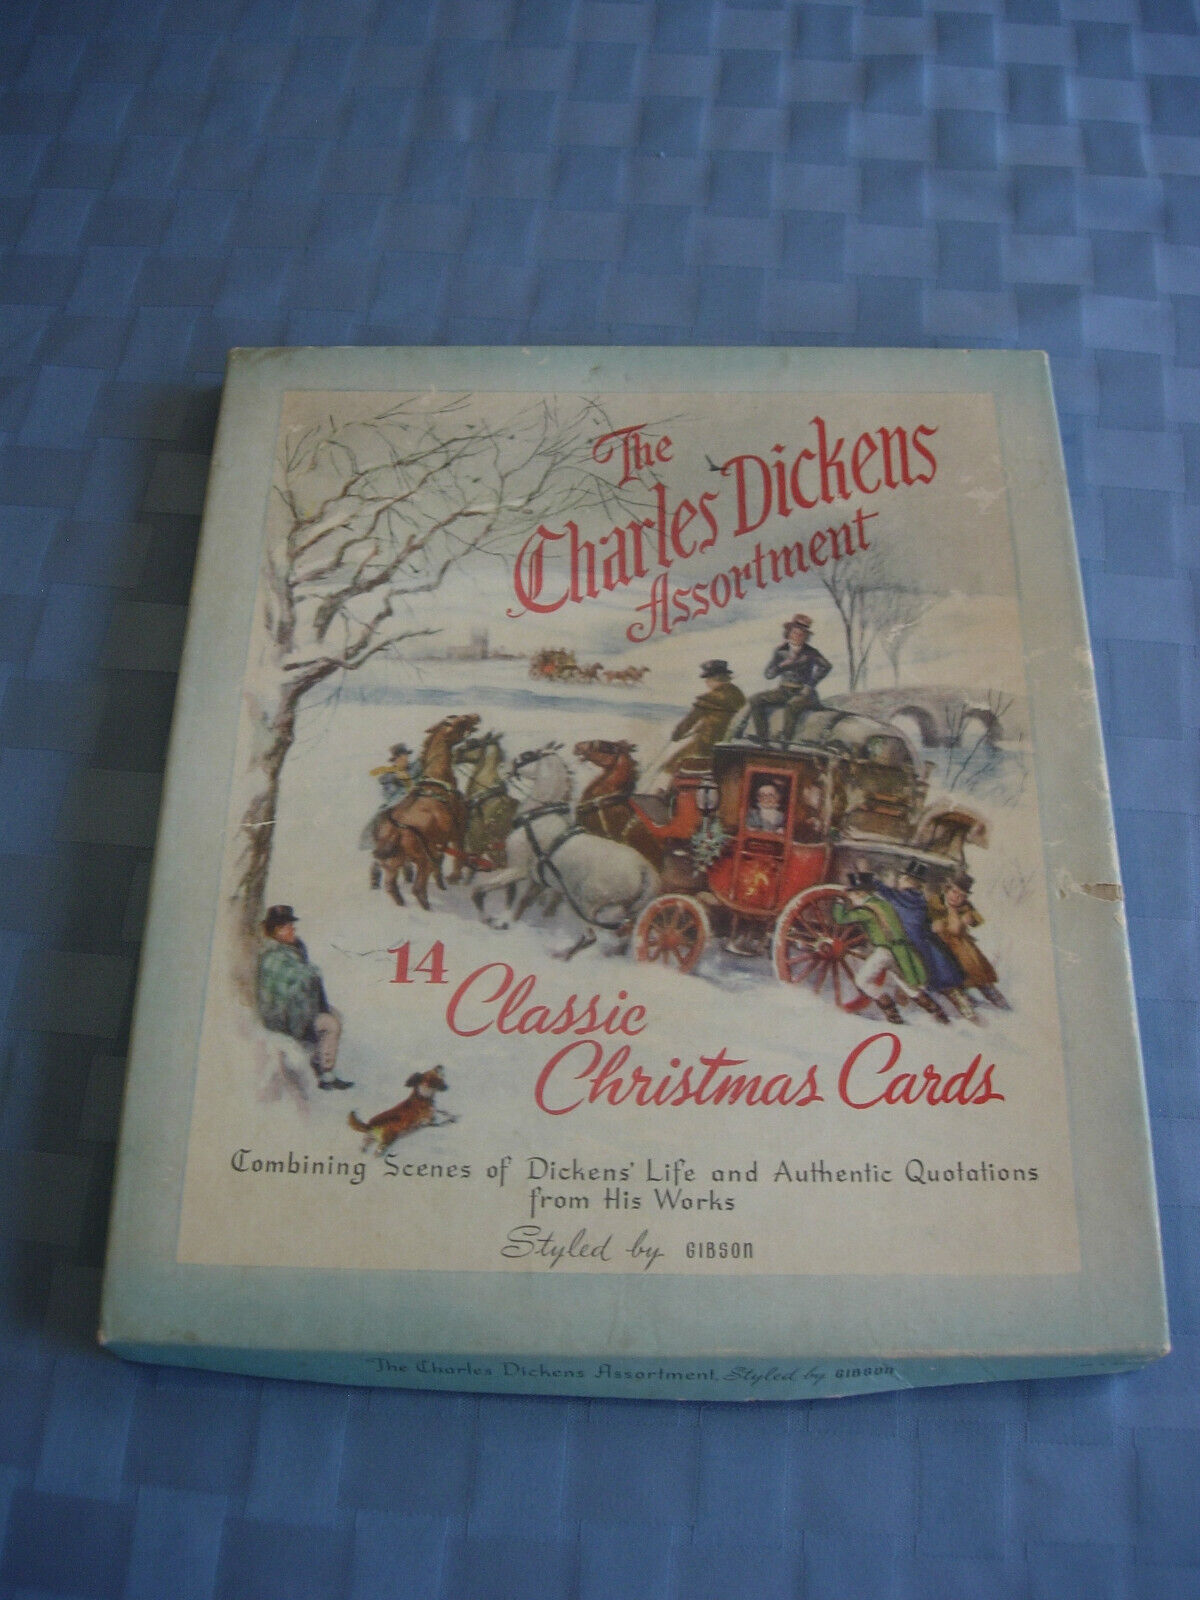 Vintage THE CHARLES DICKENS ASSORTMENT CHRISTMAS CARDS STYLED BY GIBSON EMPTYBOX